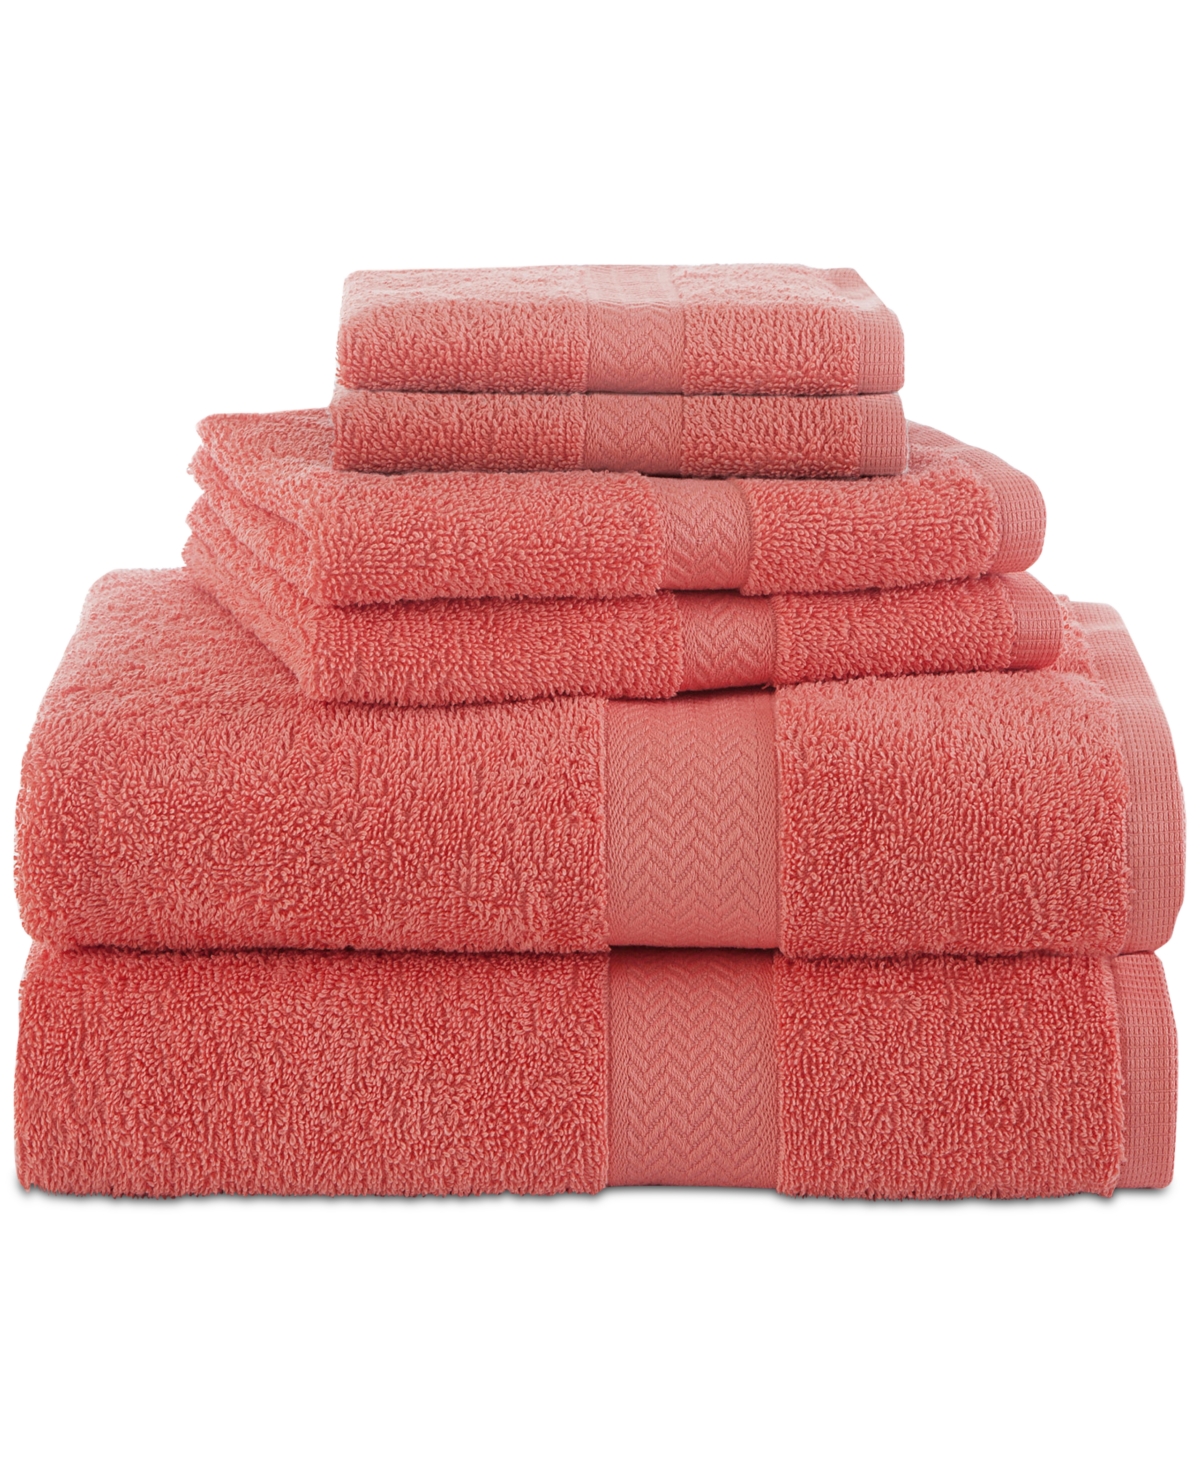 Martex Ringspun Cotton 6-pc. Towel Set In Coral